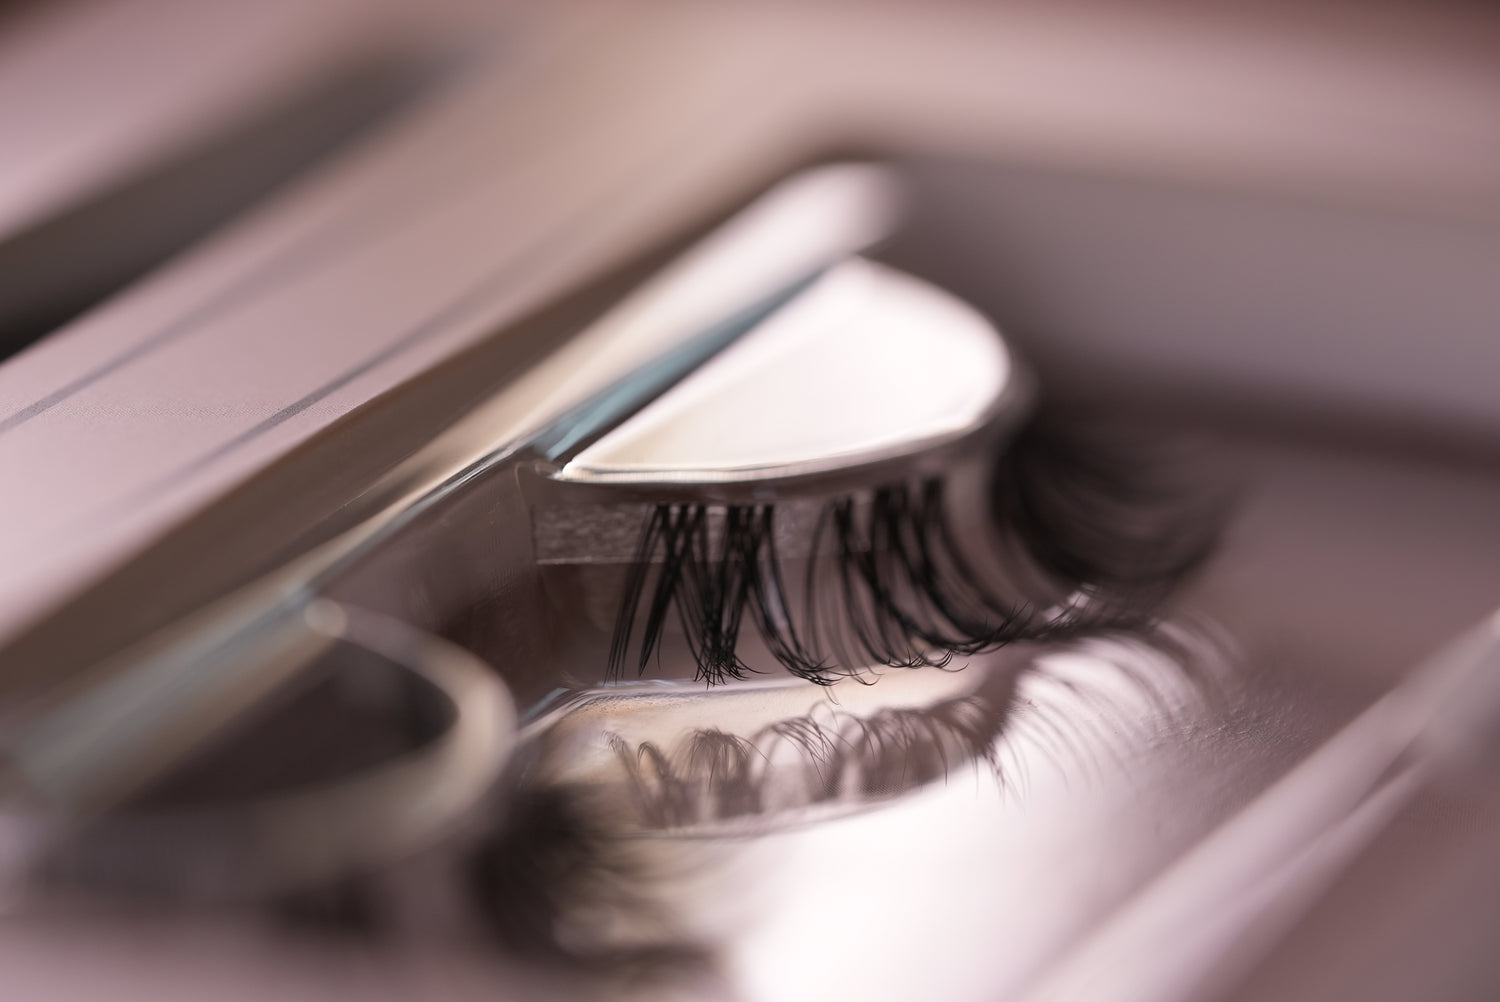 Revolutionize Your Look with Our DIY Lash Extensions